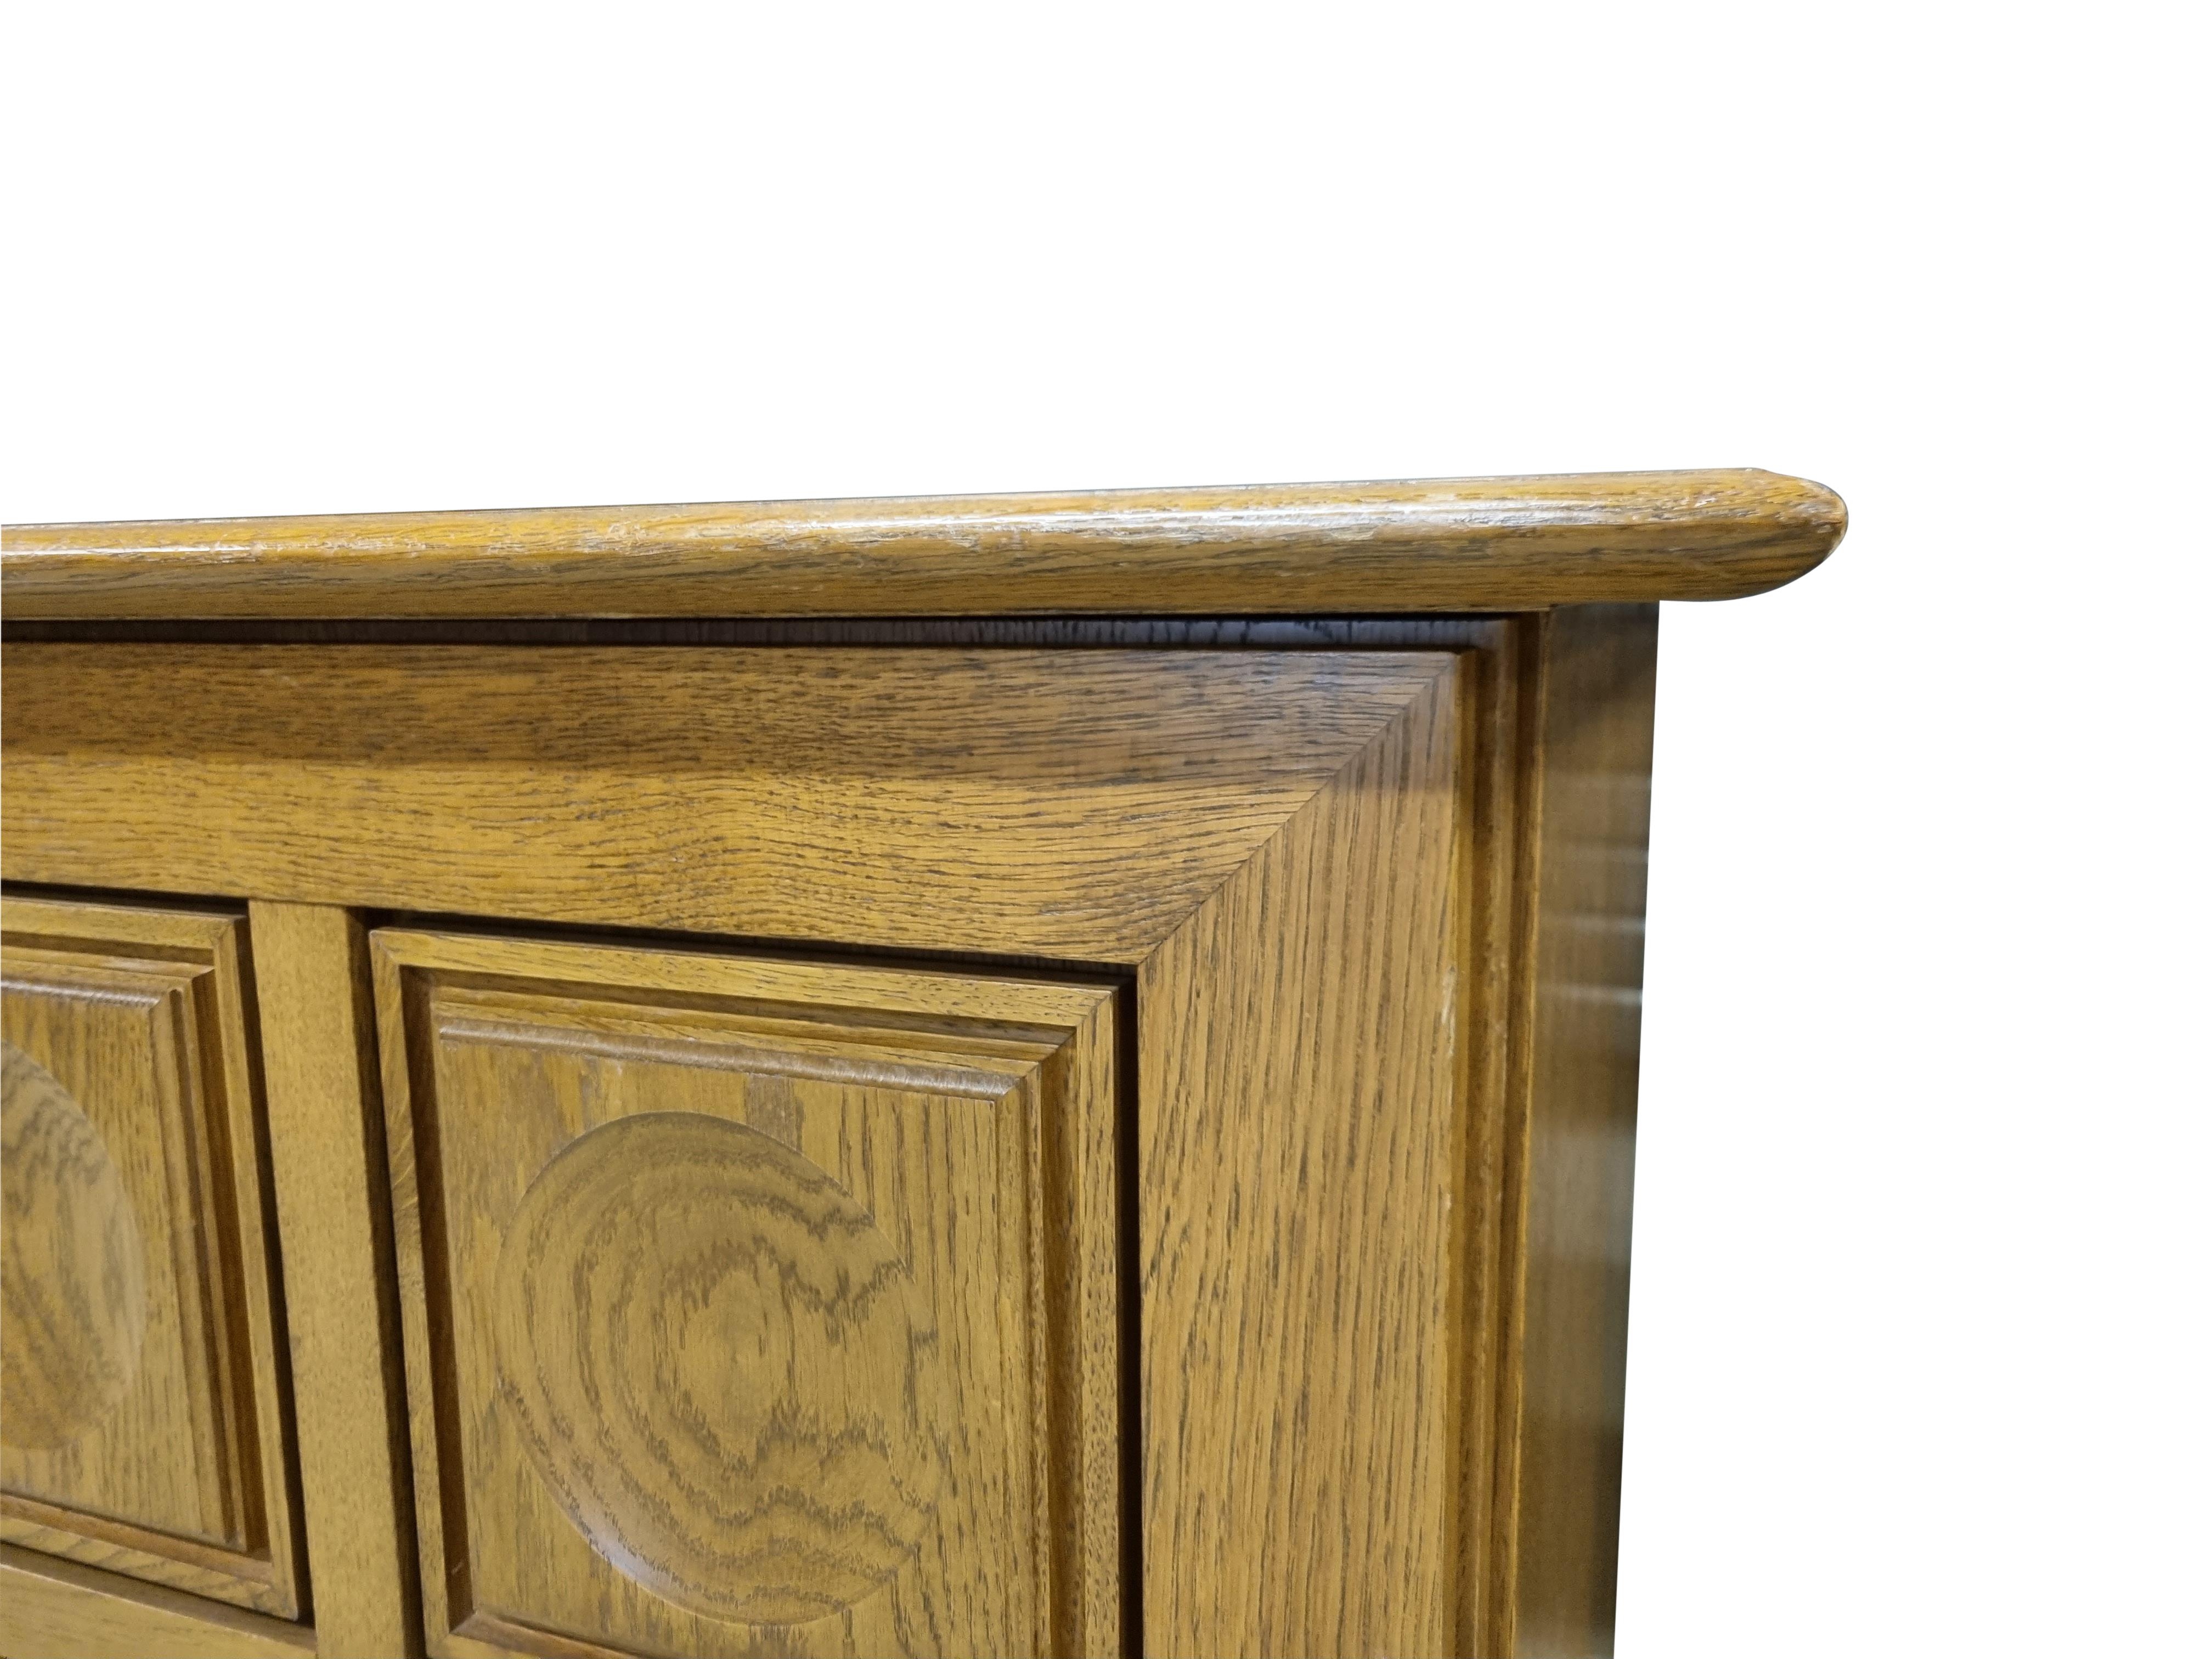 Brown brutalist oak credenza with 4 graphical doors.

Beautiful timeless design and a real eye catcher for your living room.

This credenza provides plenty of storage space with two integrated drawers.

Good overall condition

1970s -